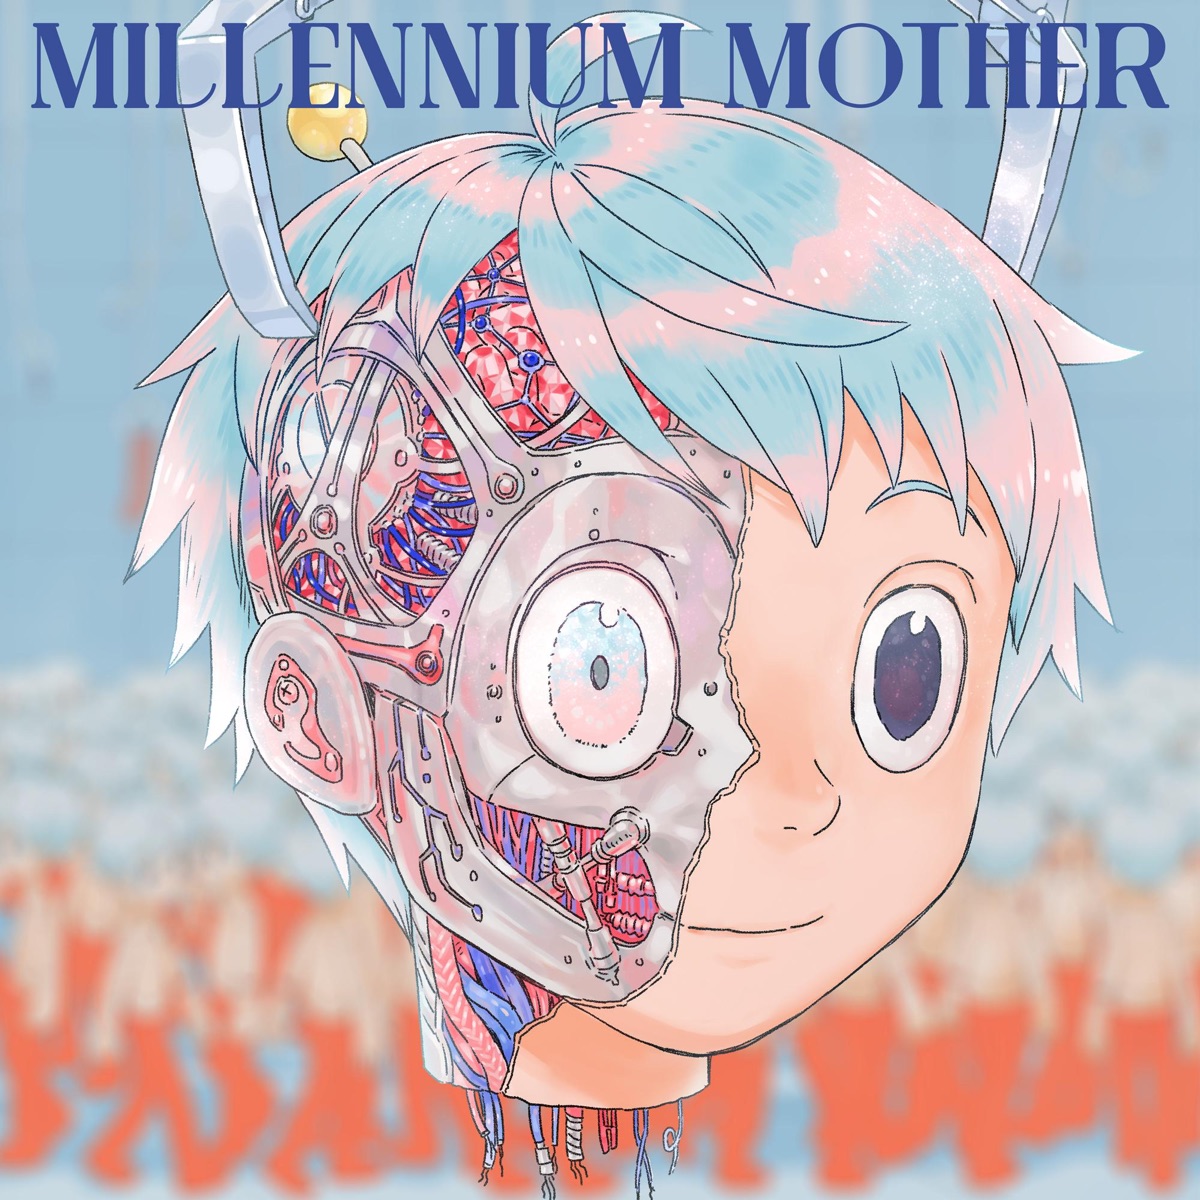 Cover art for『Mili - Lemonade』from the release『Millennium Mother